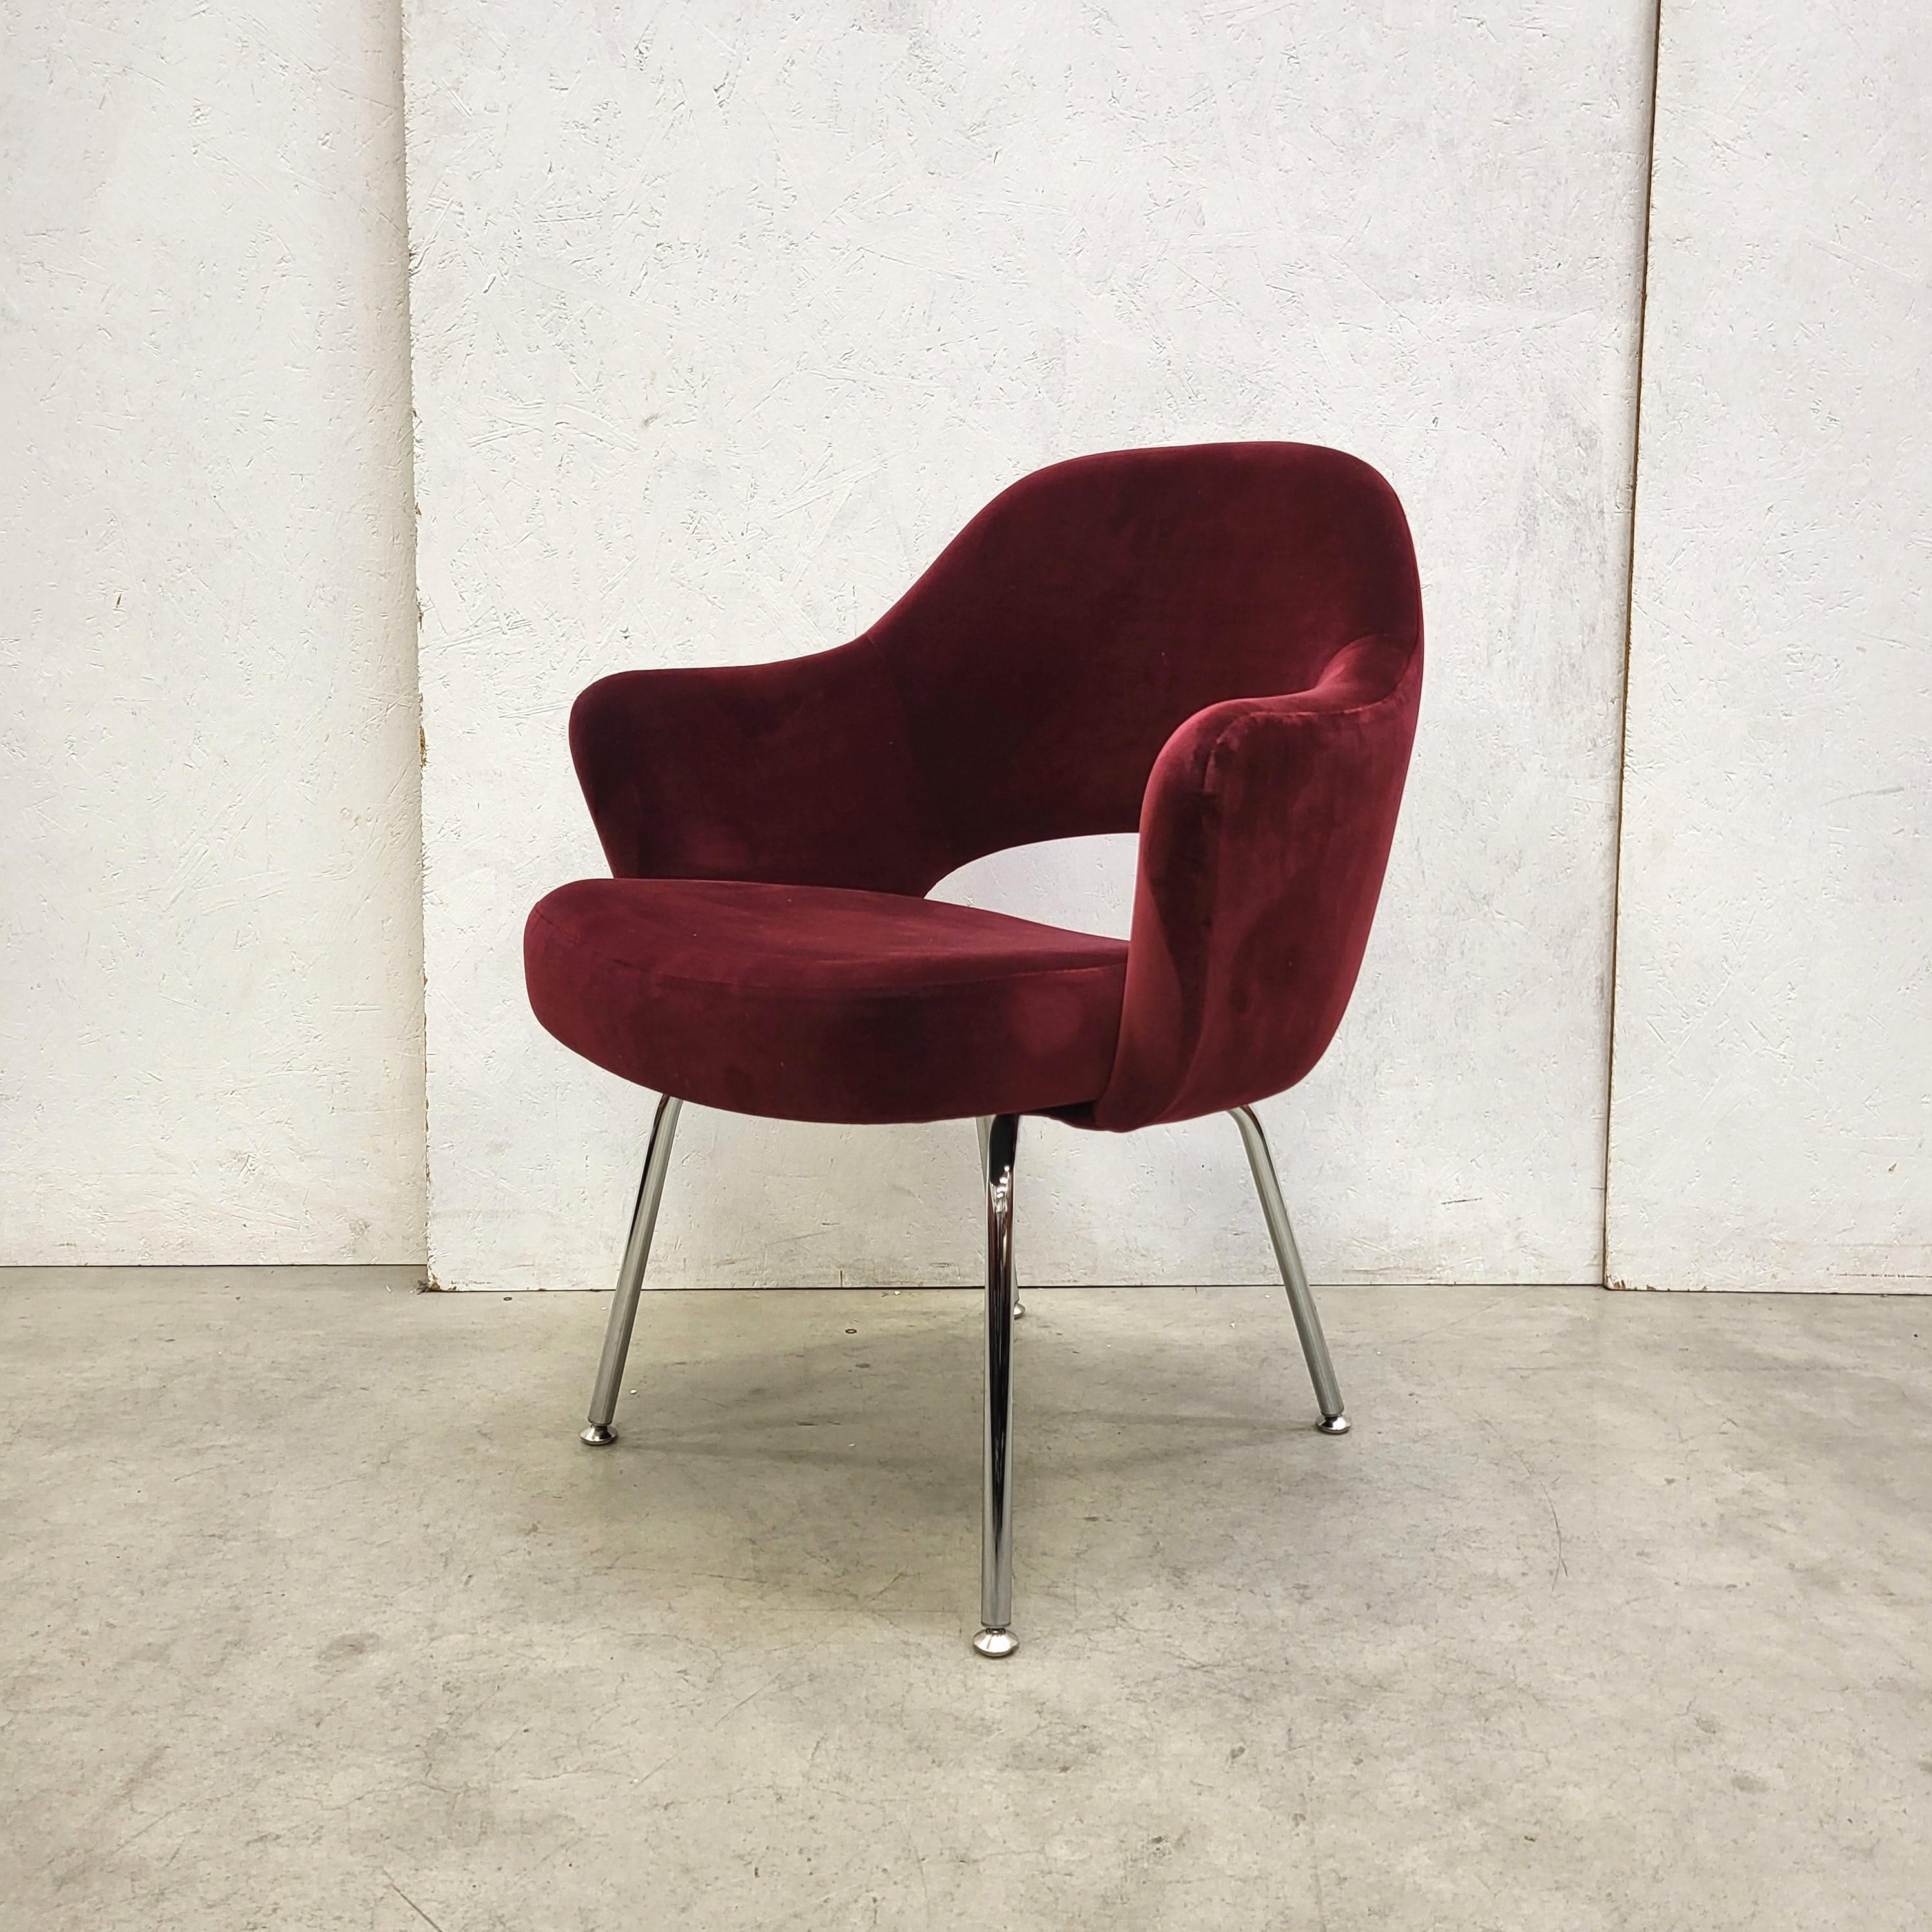 Hand-Crafted Knoll Executive Chair by Eero Saarinen Bayberry Velvet Set of 4, 2010